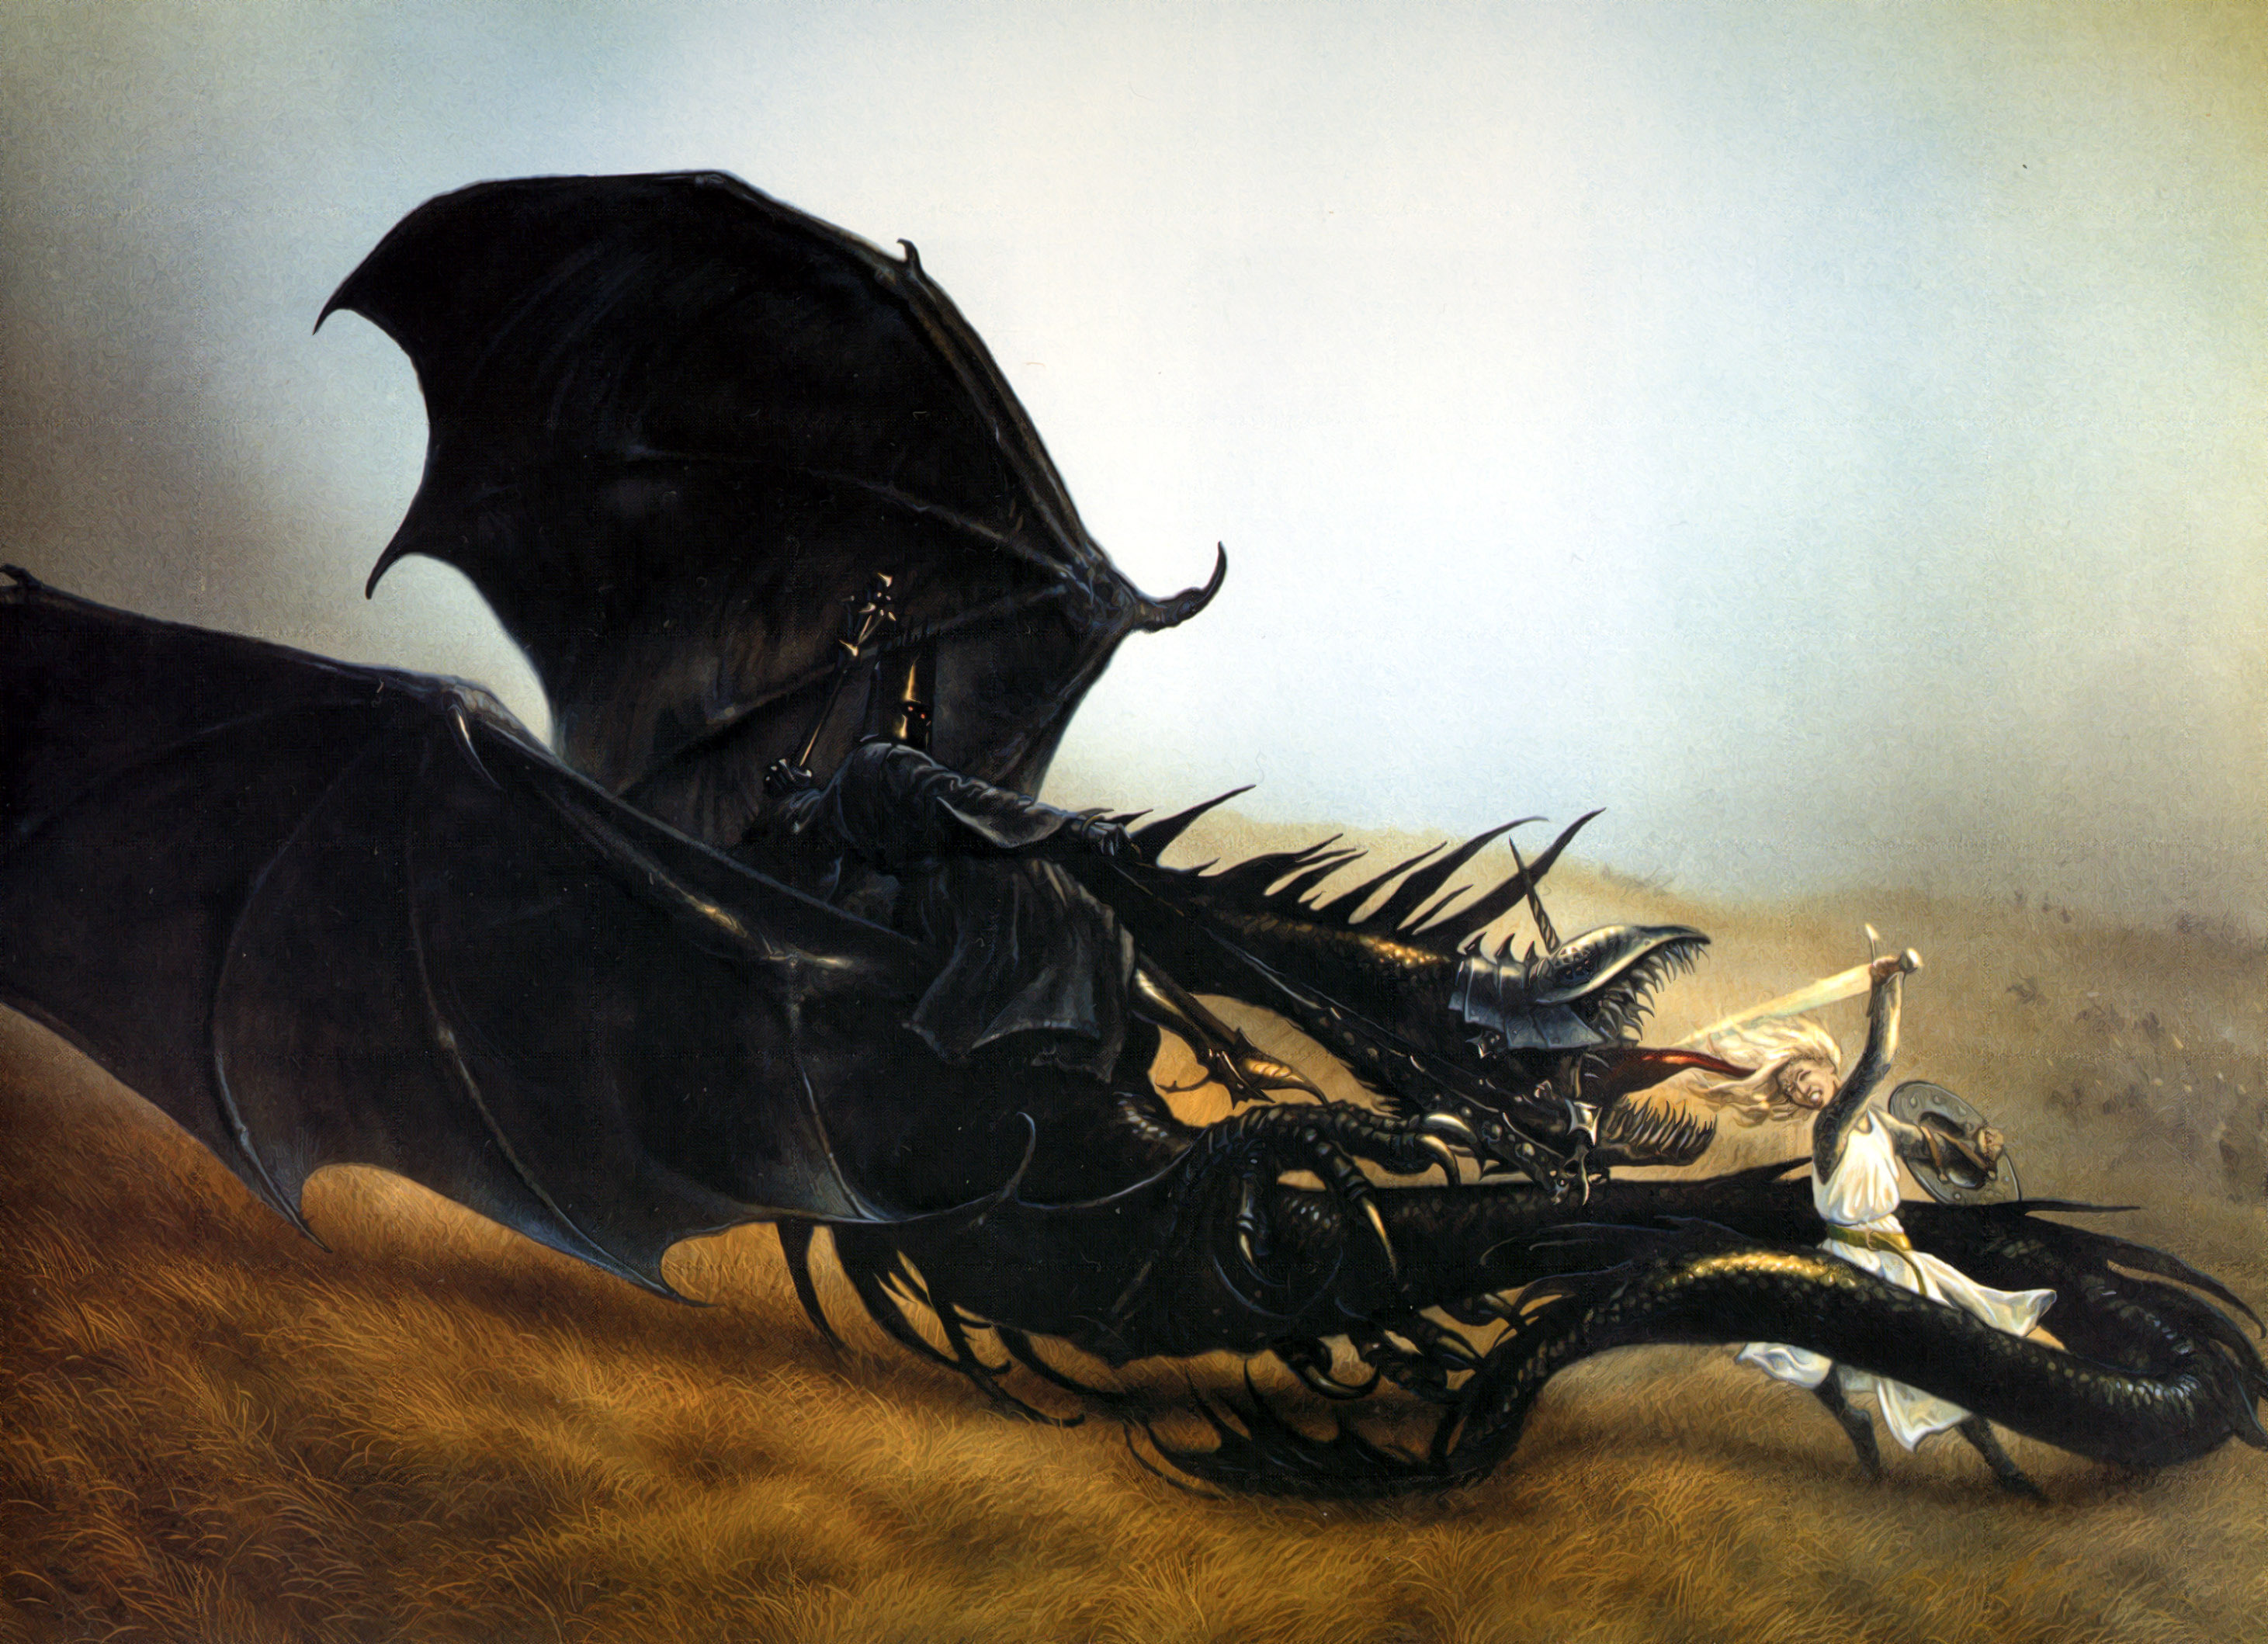 The Lord of the Rings, nazgul, artwork, Eowyn, John Howe, The Witch King - desktop wallpaper